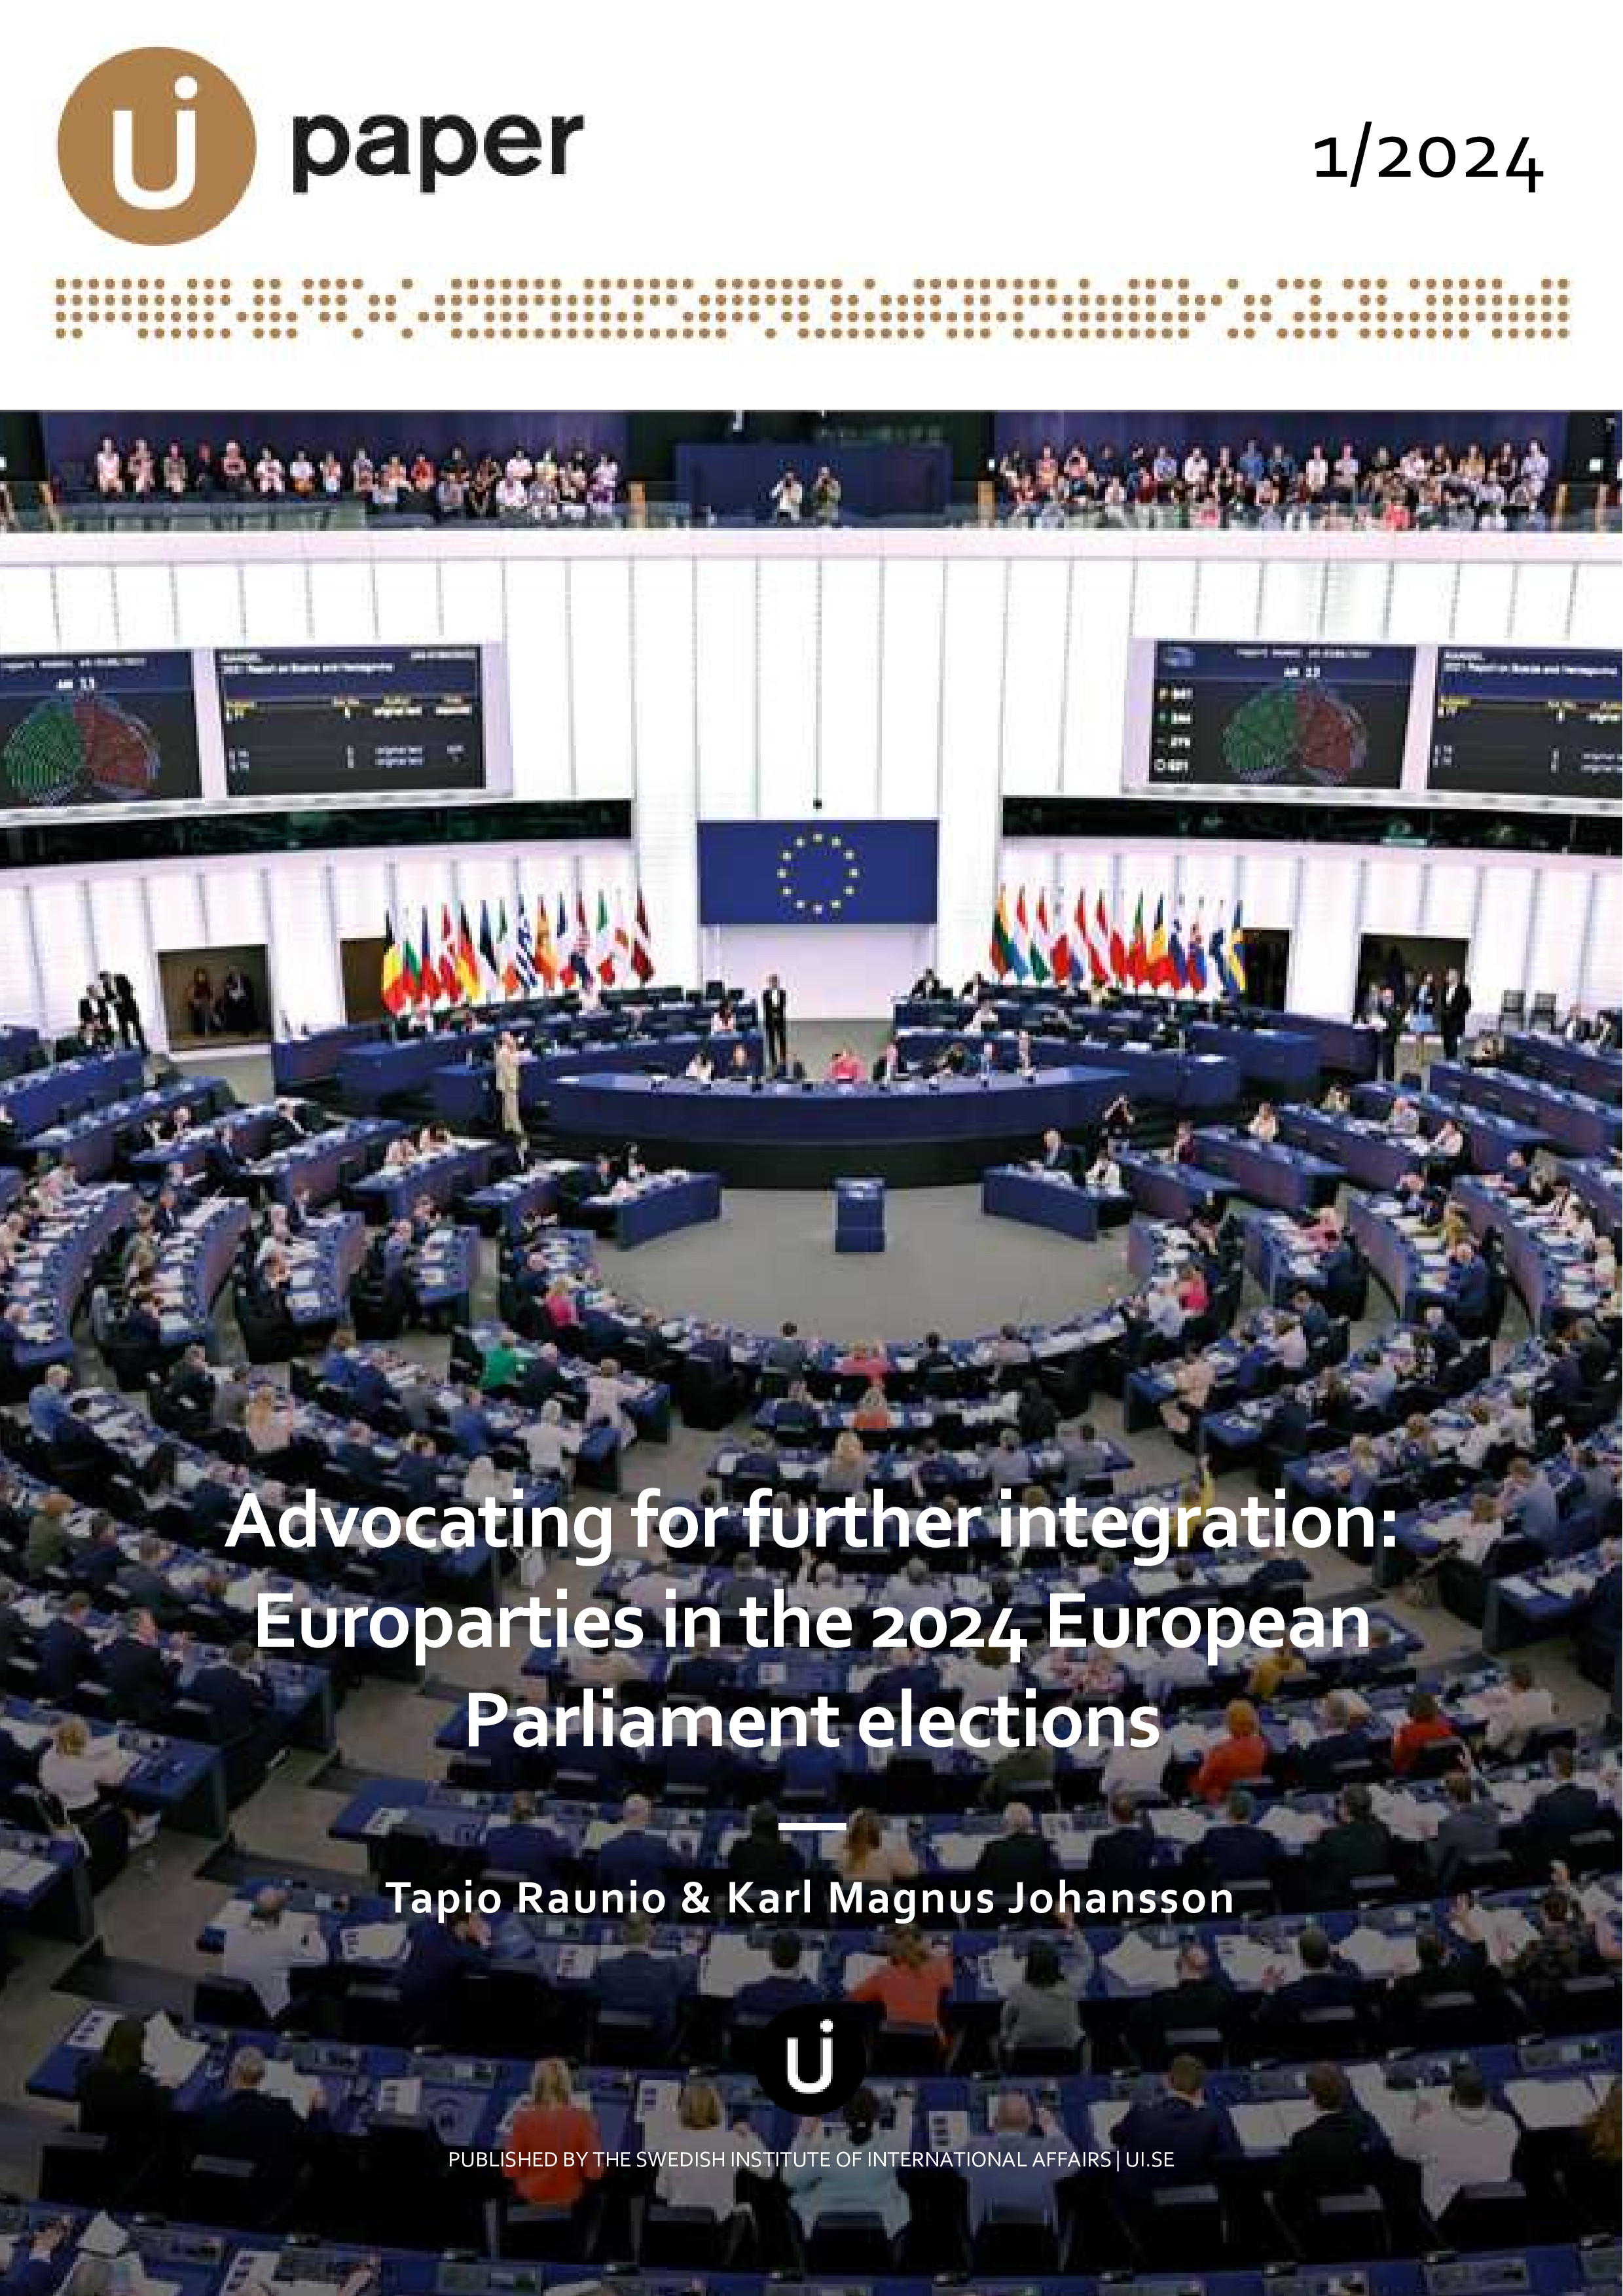 Advocating for further integration: Europarties in the 2024 European Parliament elections